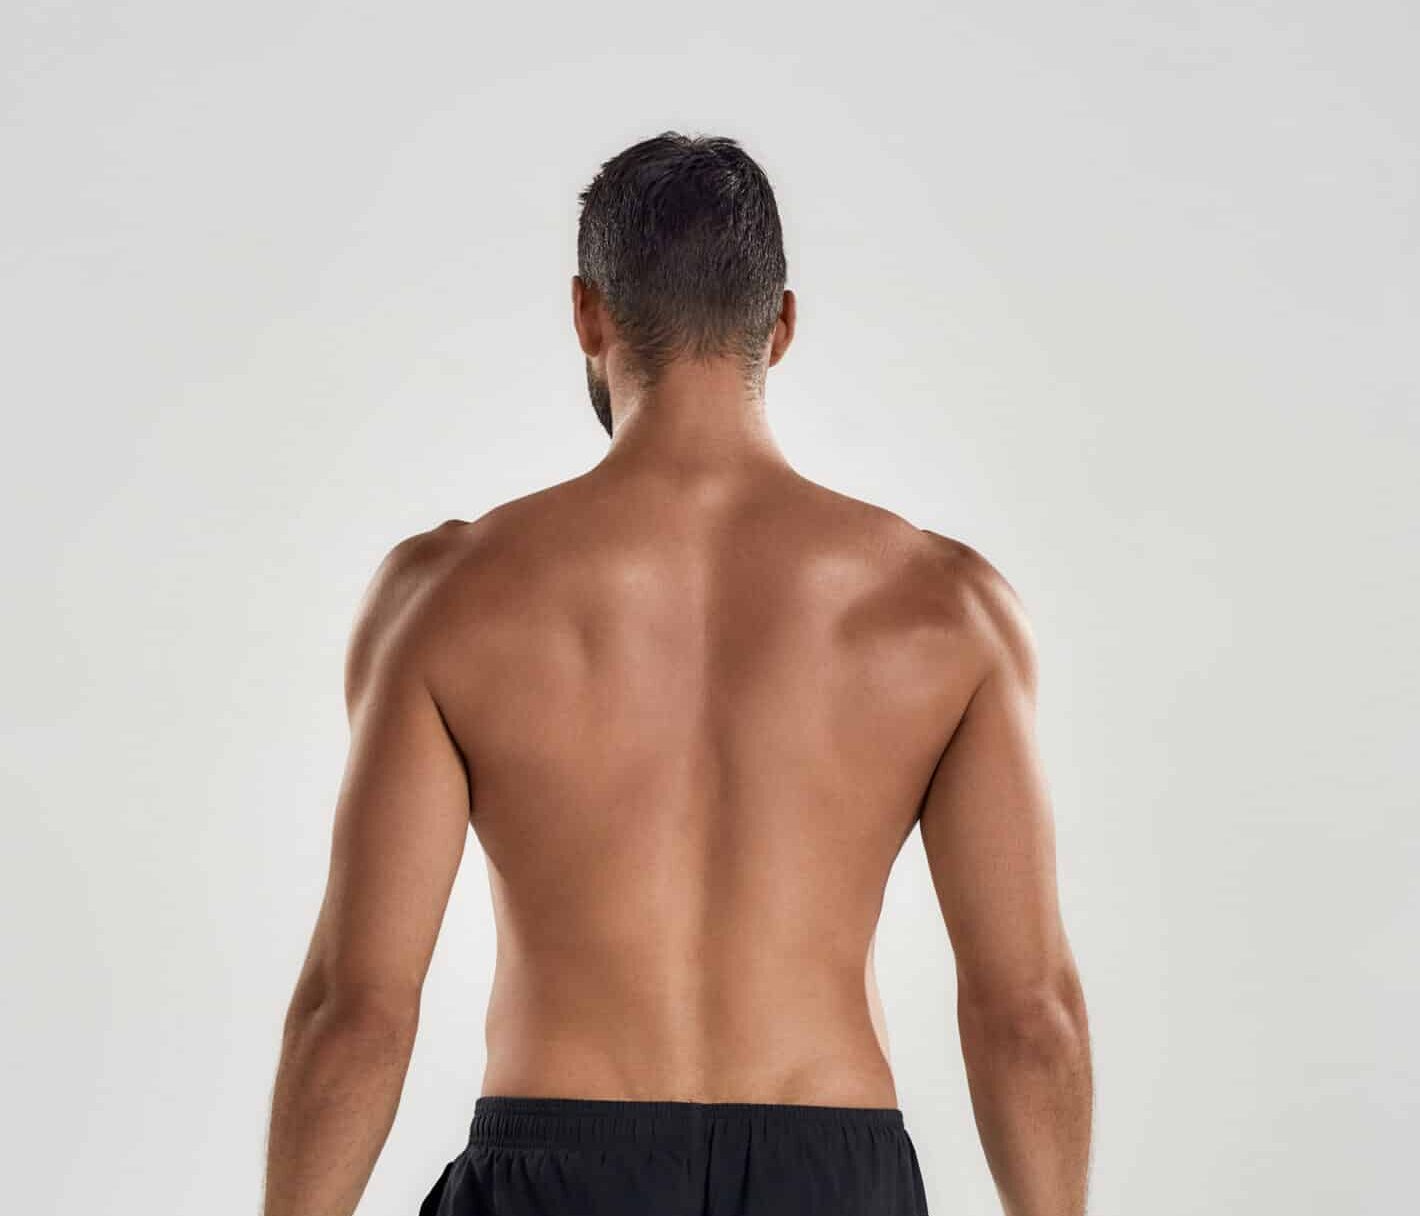 A man turned around, showcasing the toned appearance of his back and lower torso.